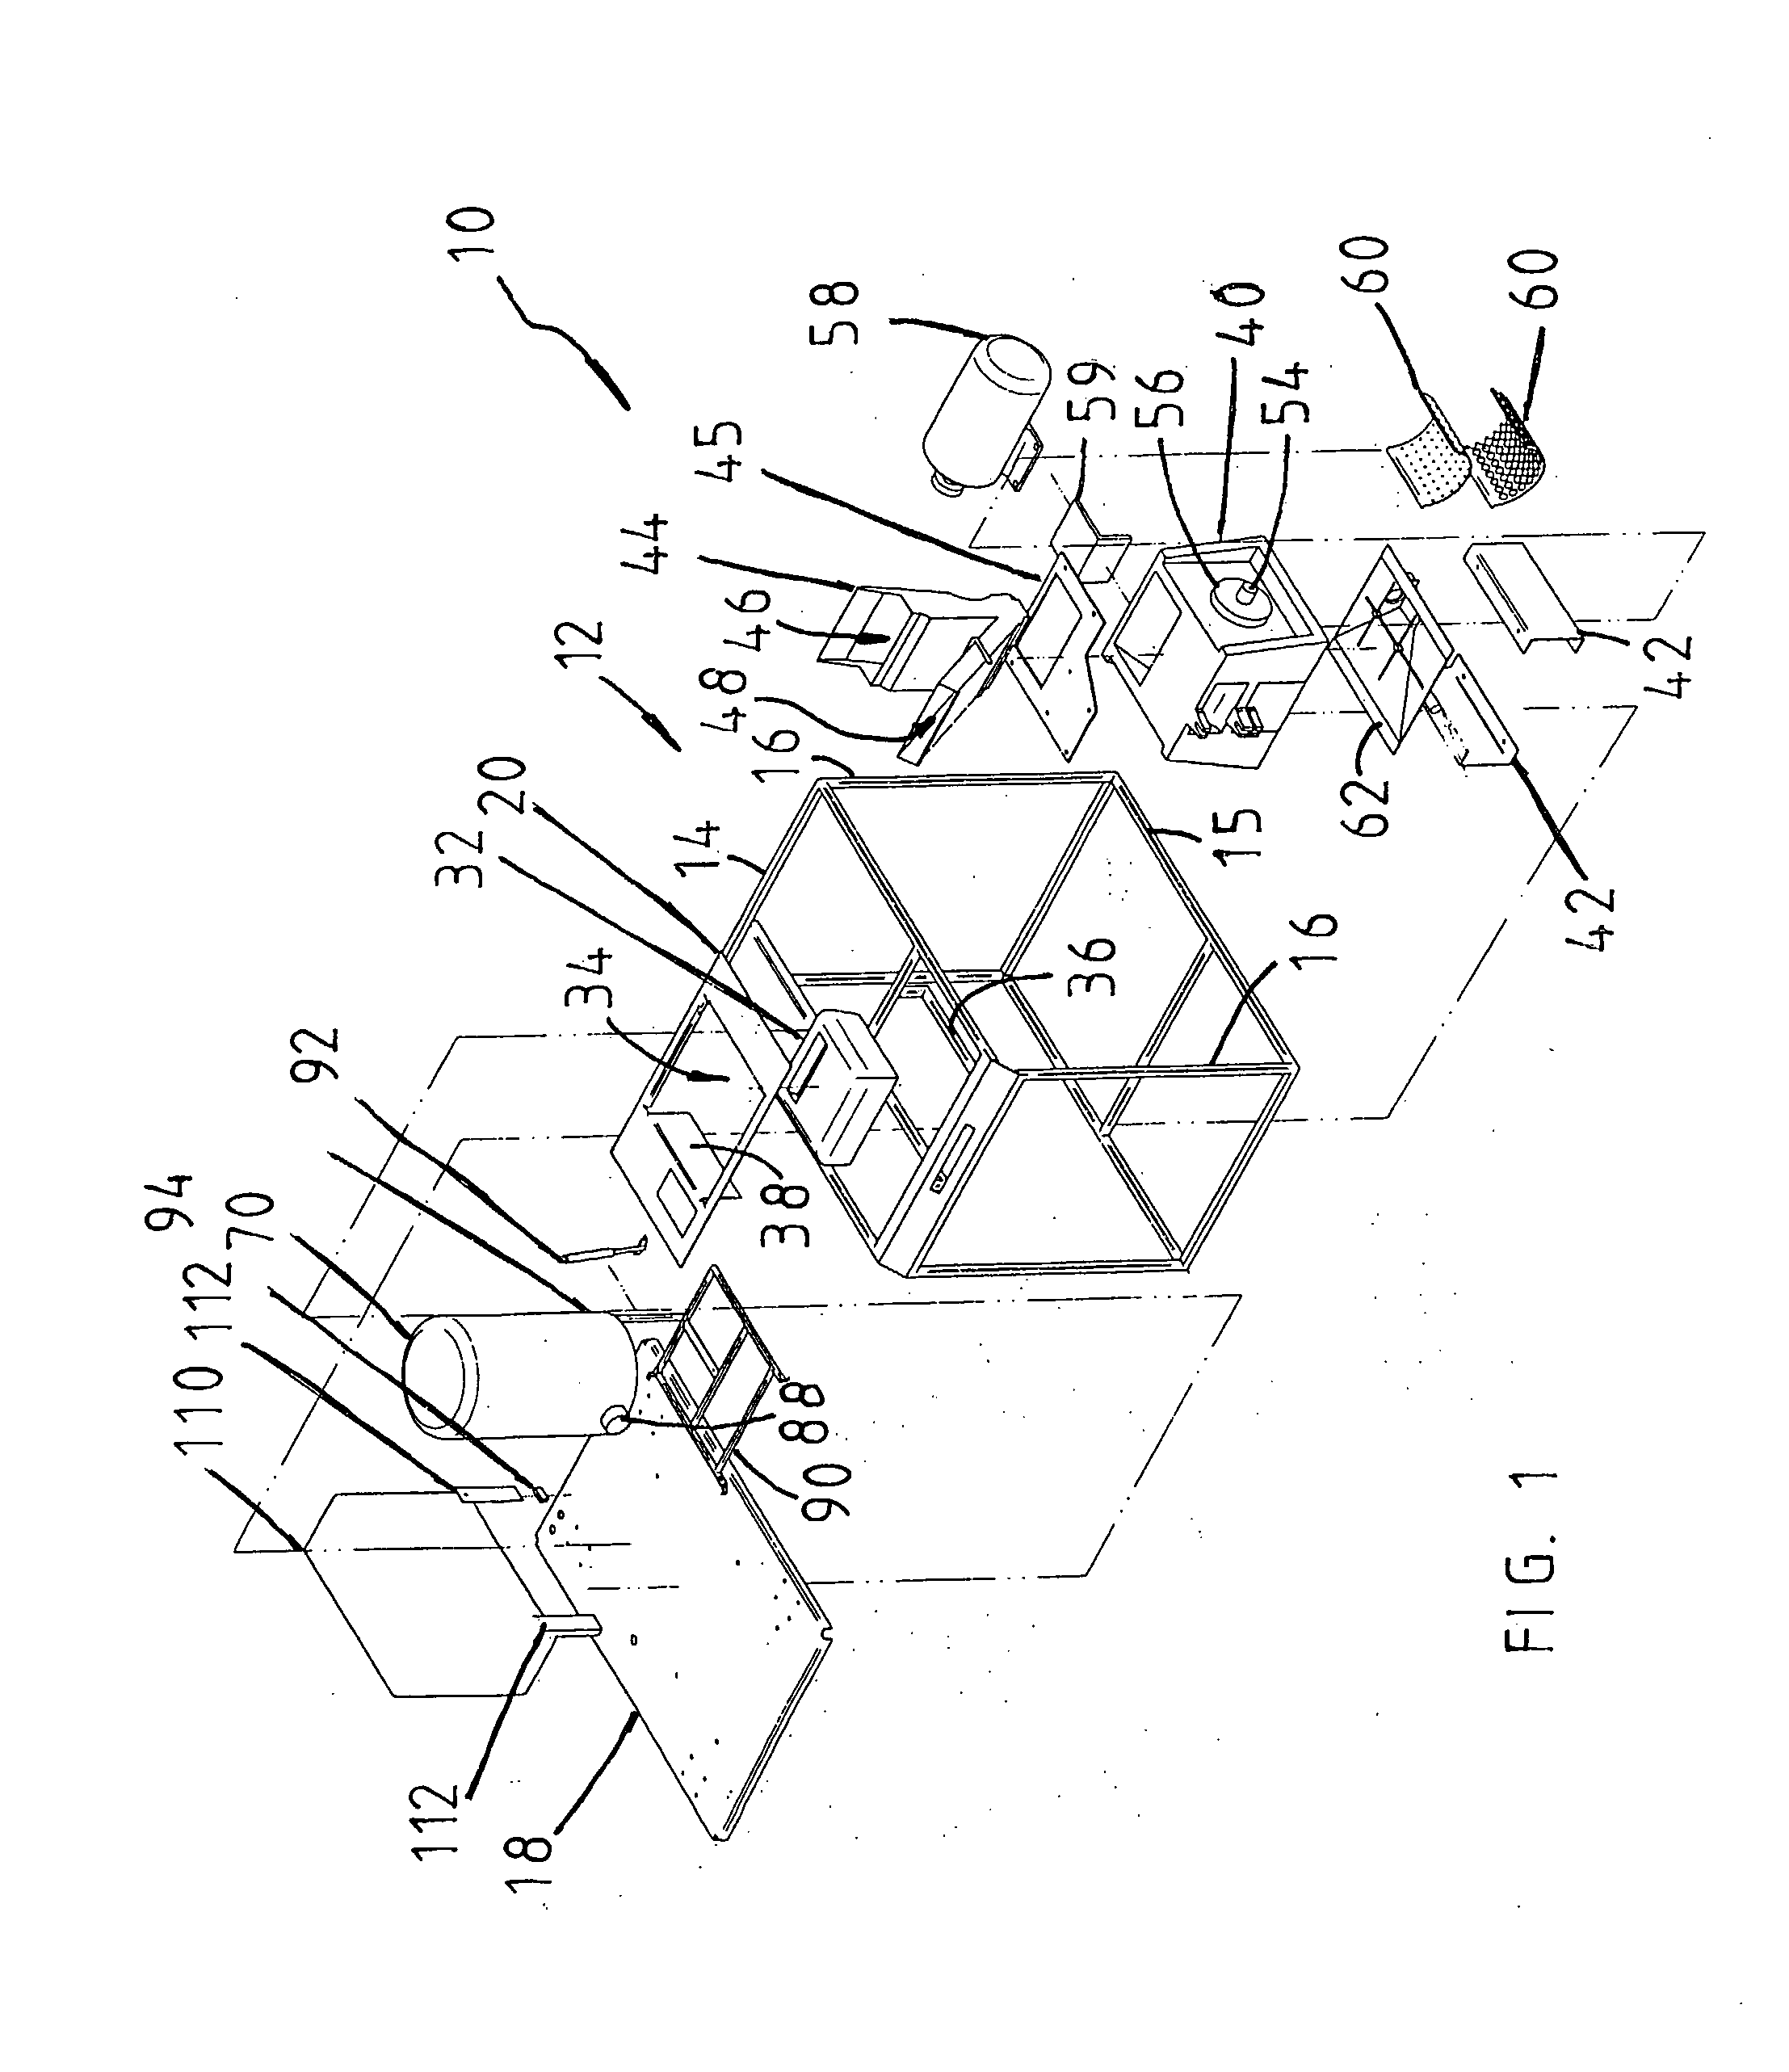 Apparatus for Materials Reduction